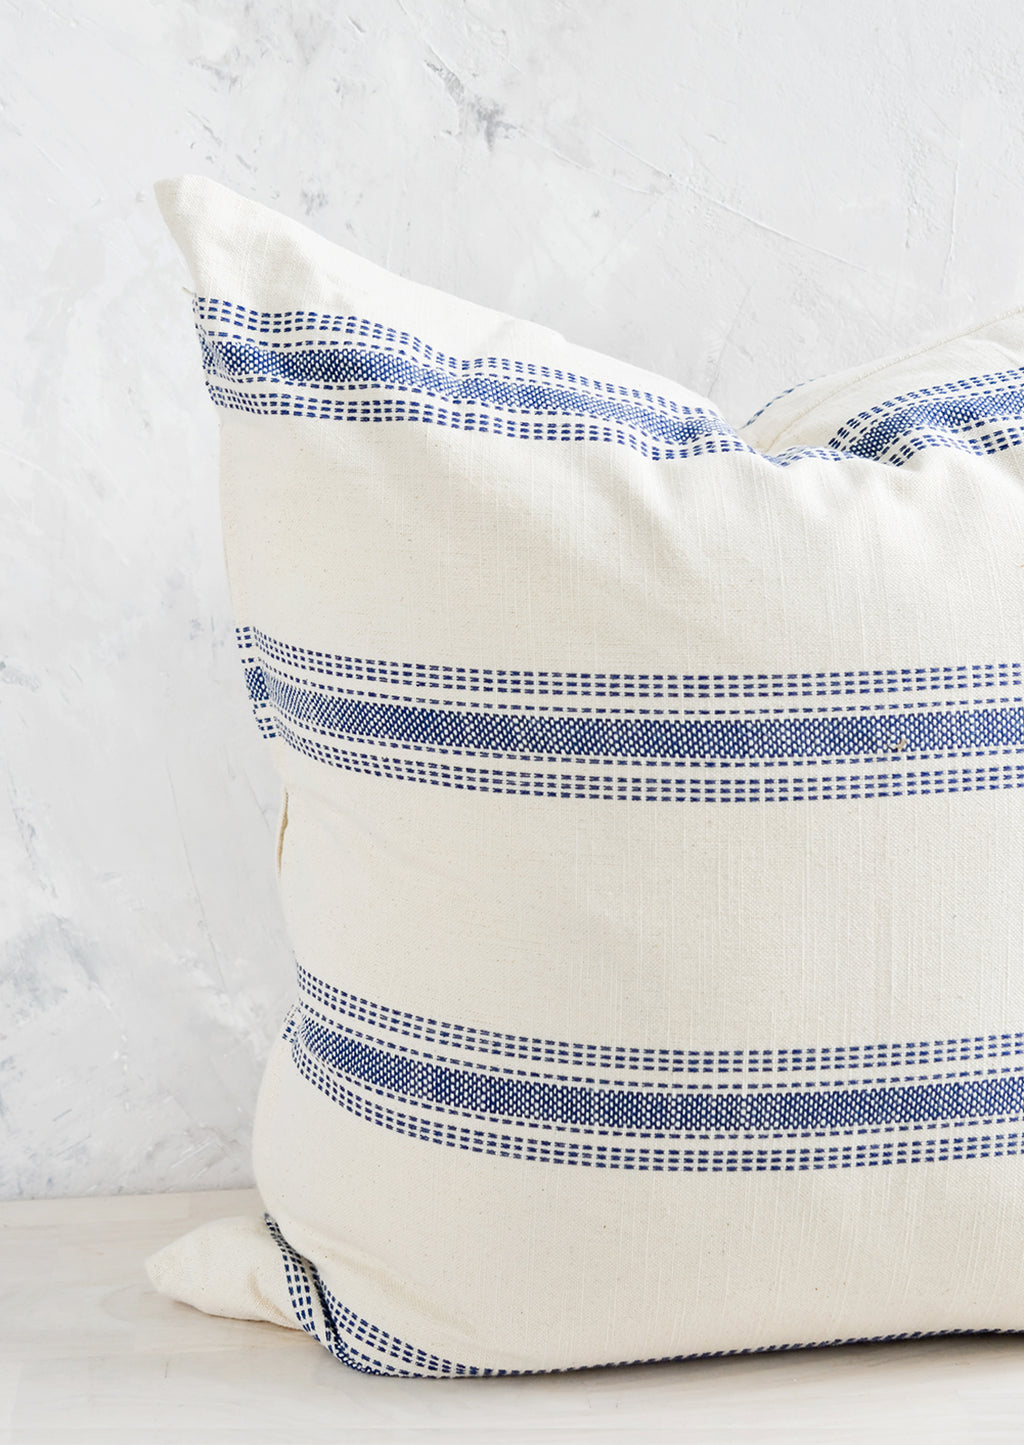 2: A large, square-shaped throw pillow in cream cotton with horizontal embroidered blue stripes.